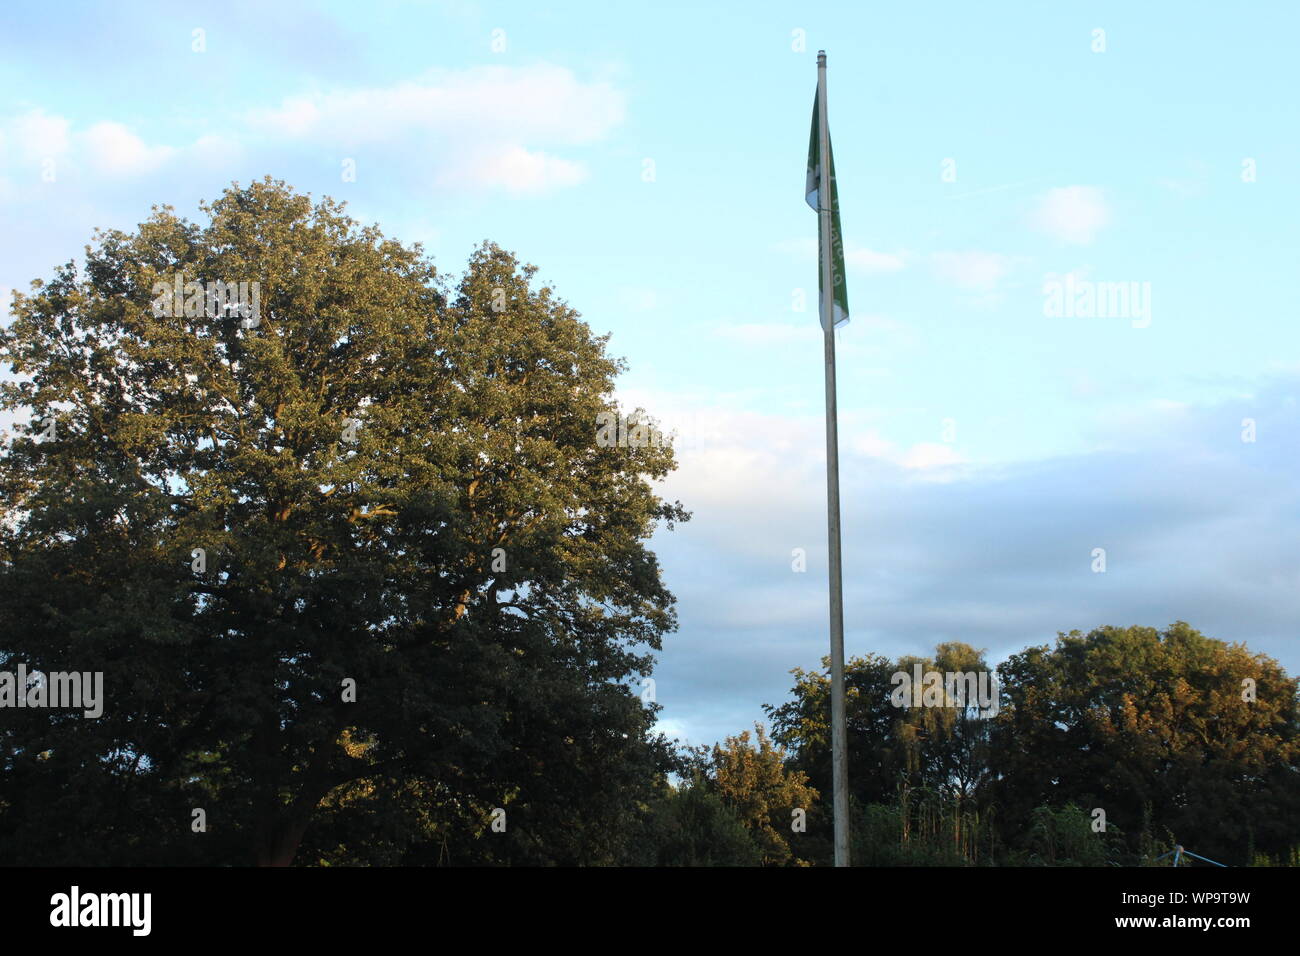 Flag pole and big trees in front of a bright blue sky Stock Photo